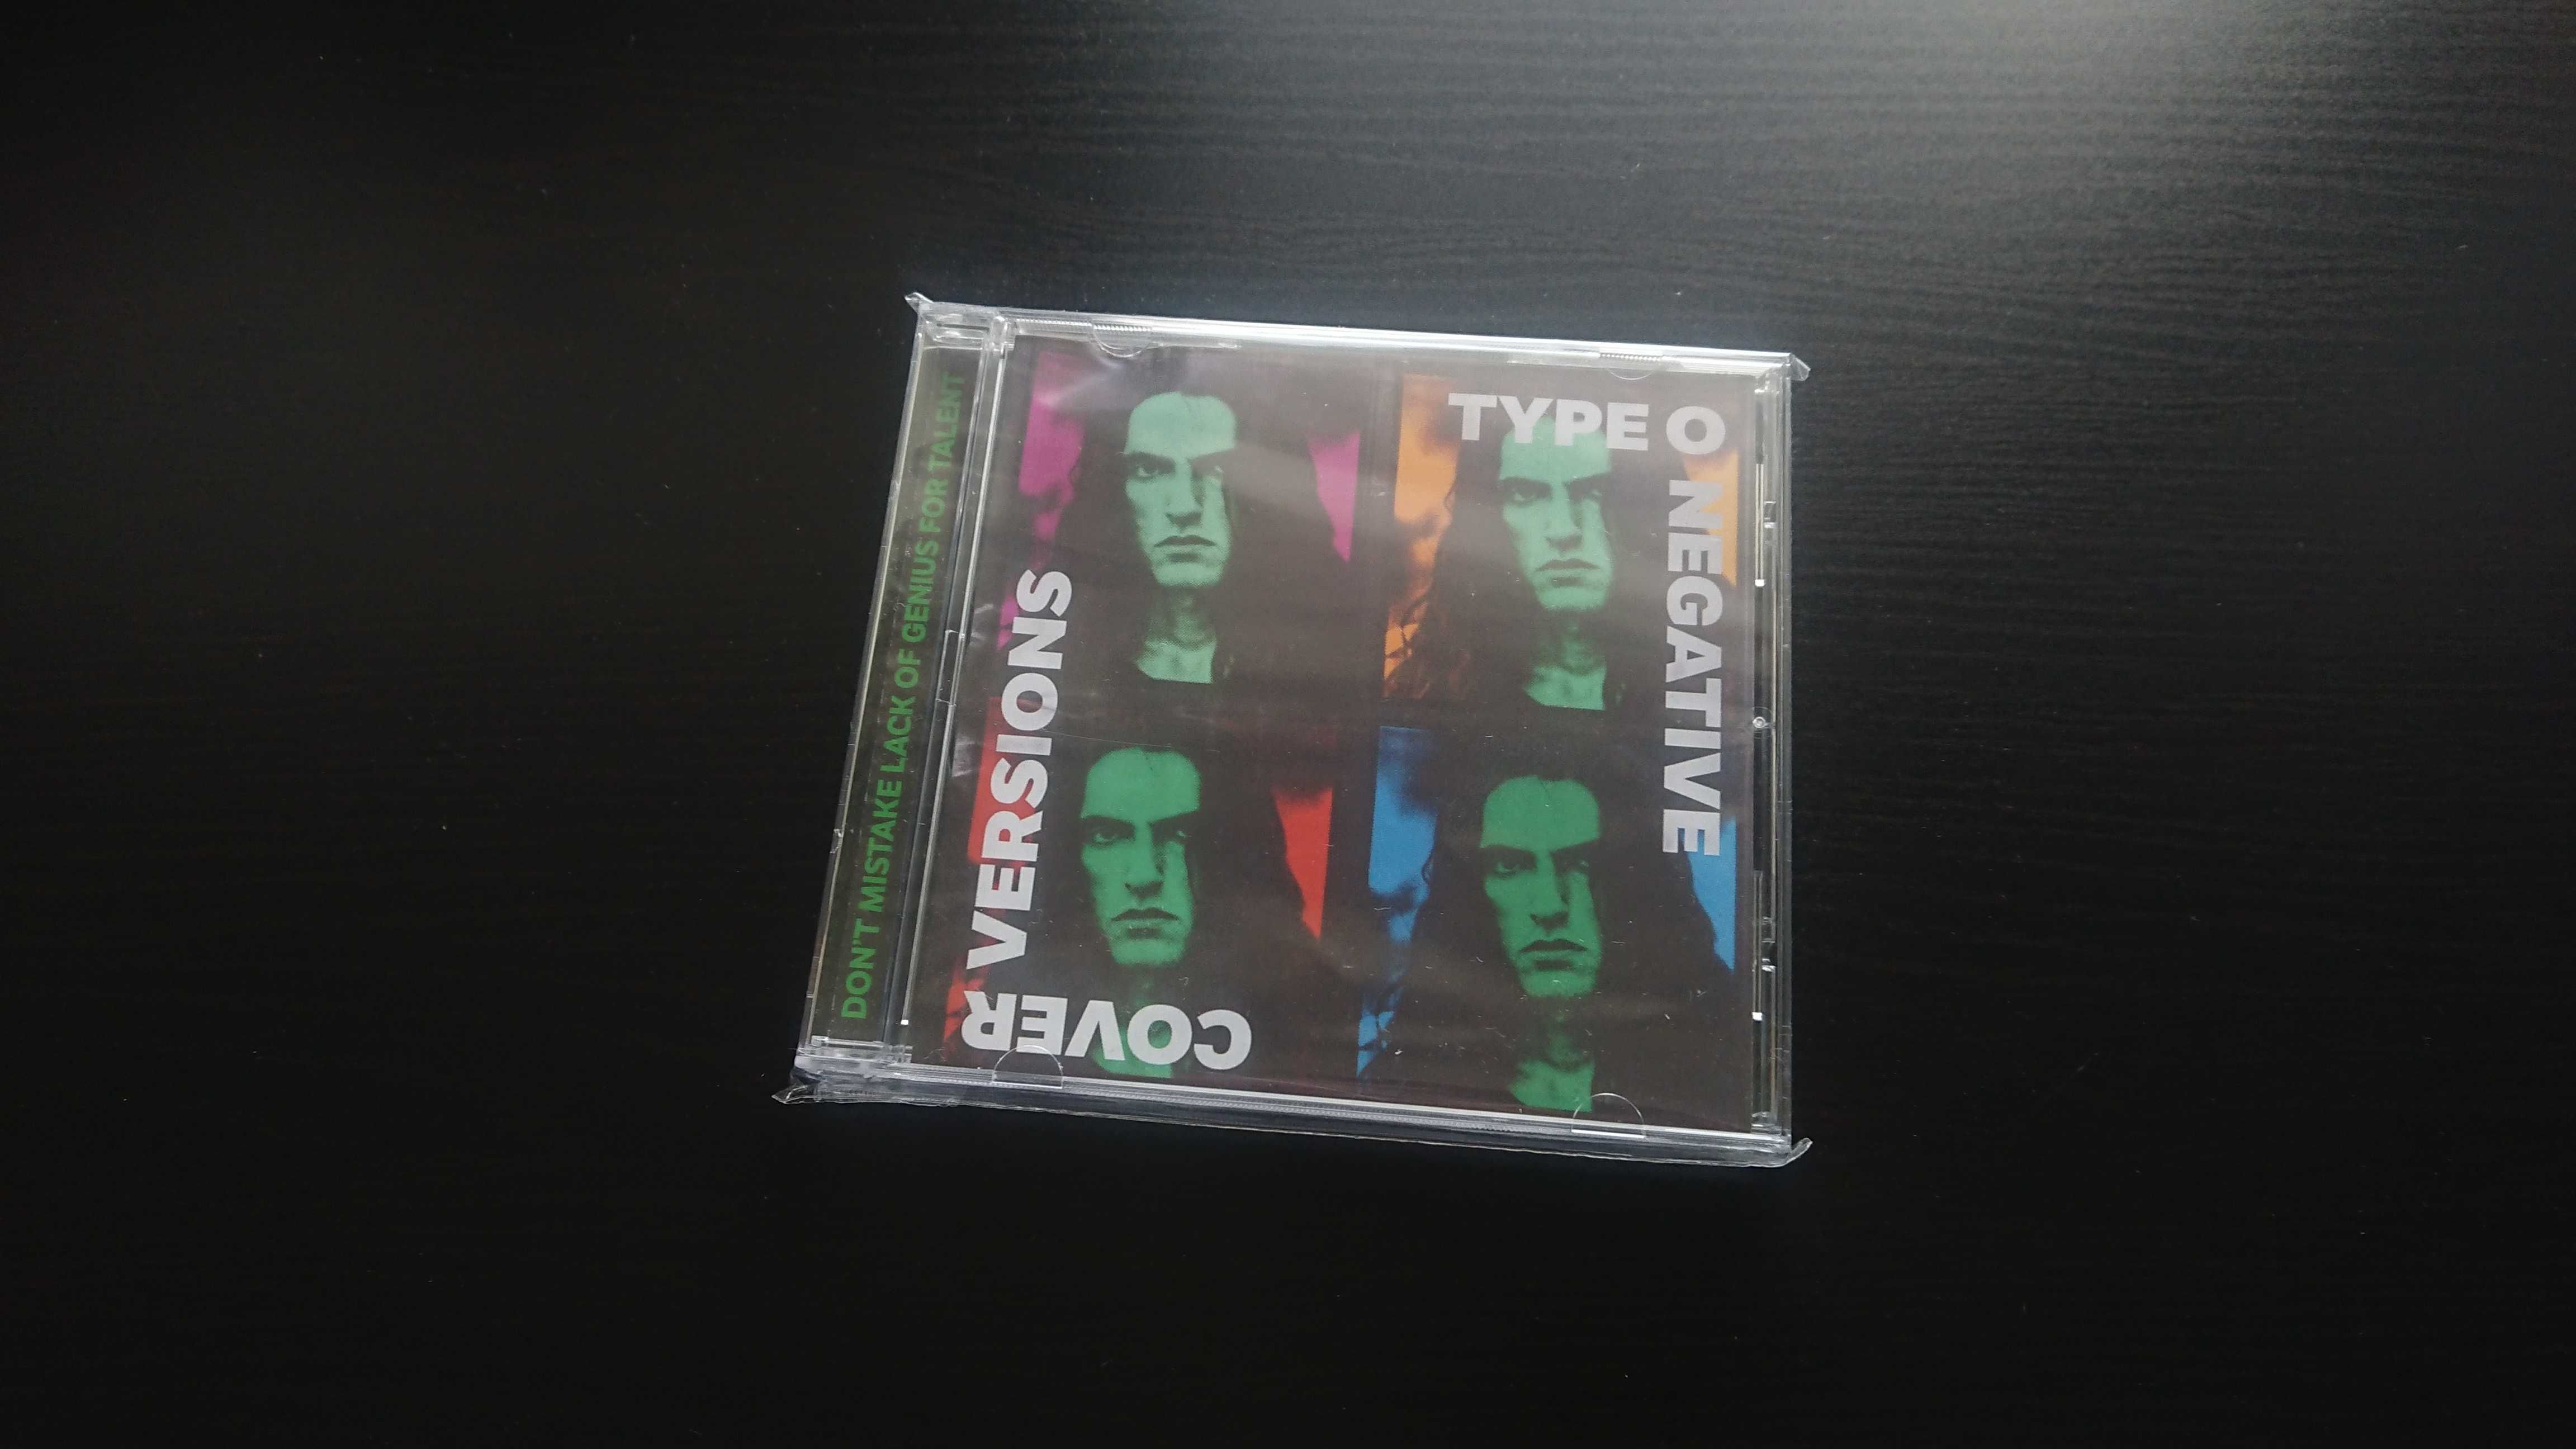 Type O Negative Cover Versions CD *NOWA* Limited 500 Copies Folia 2019